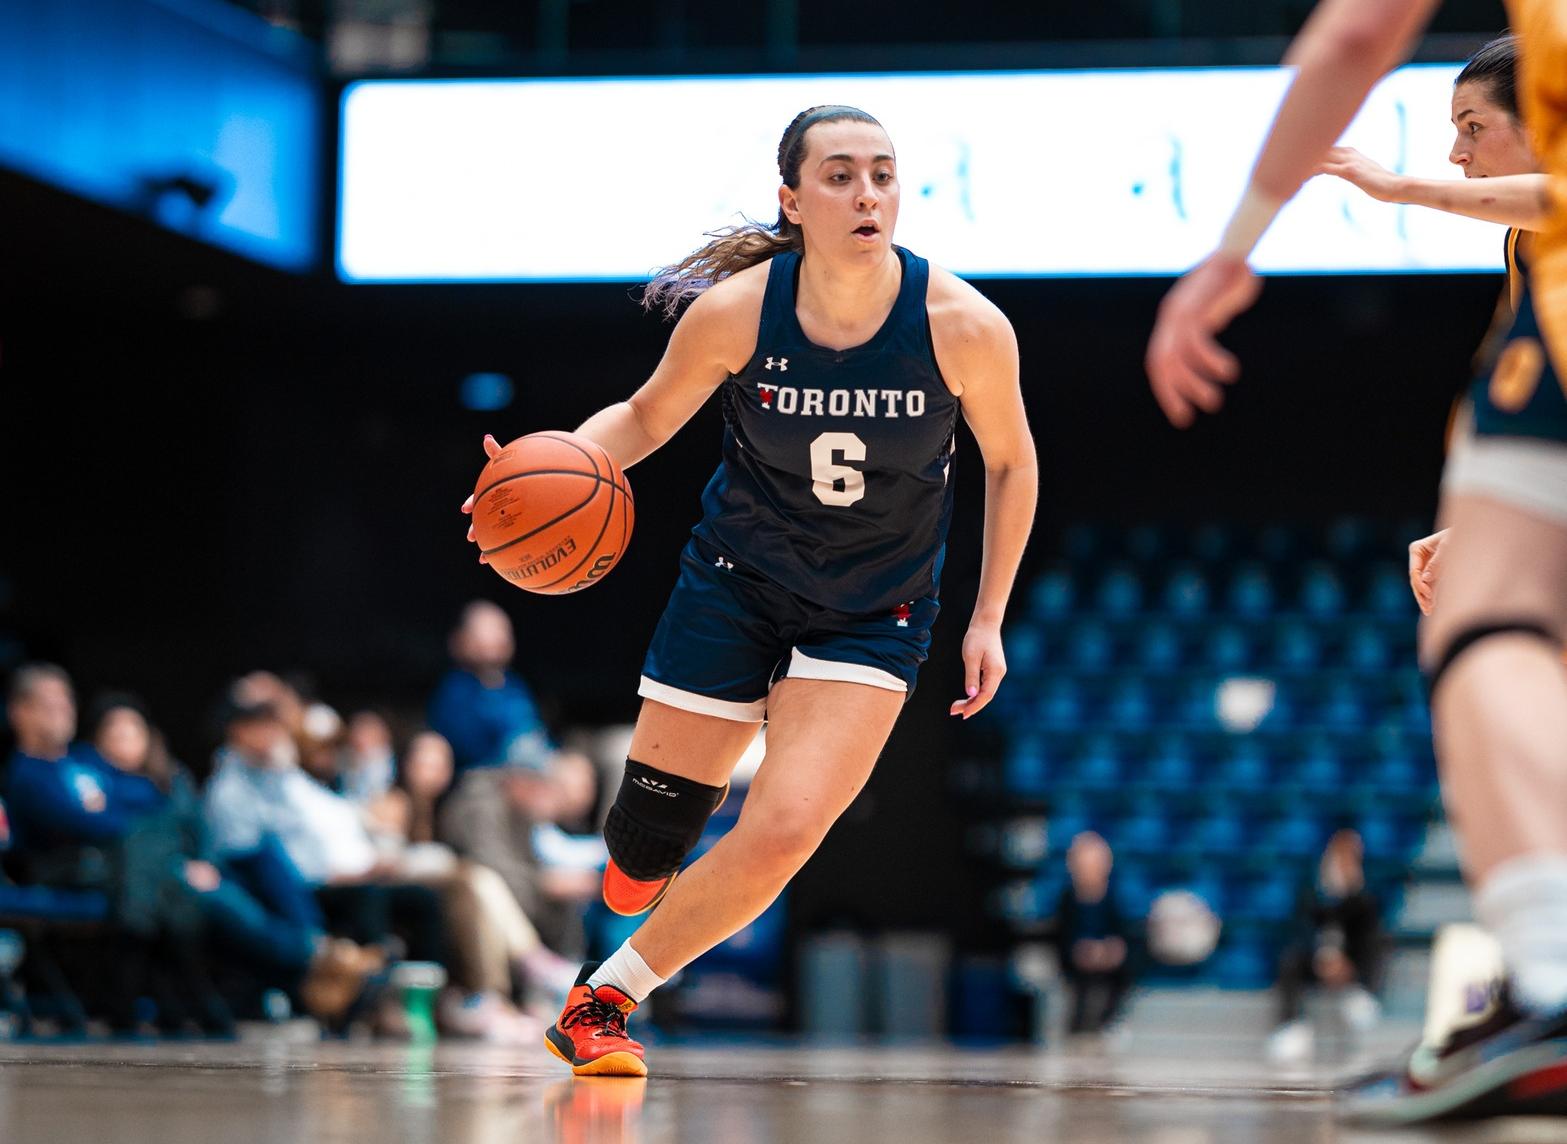 Image of Toronto women's basketball player running and dribbling the ball with her right hand 